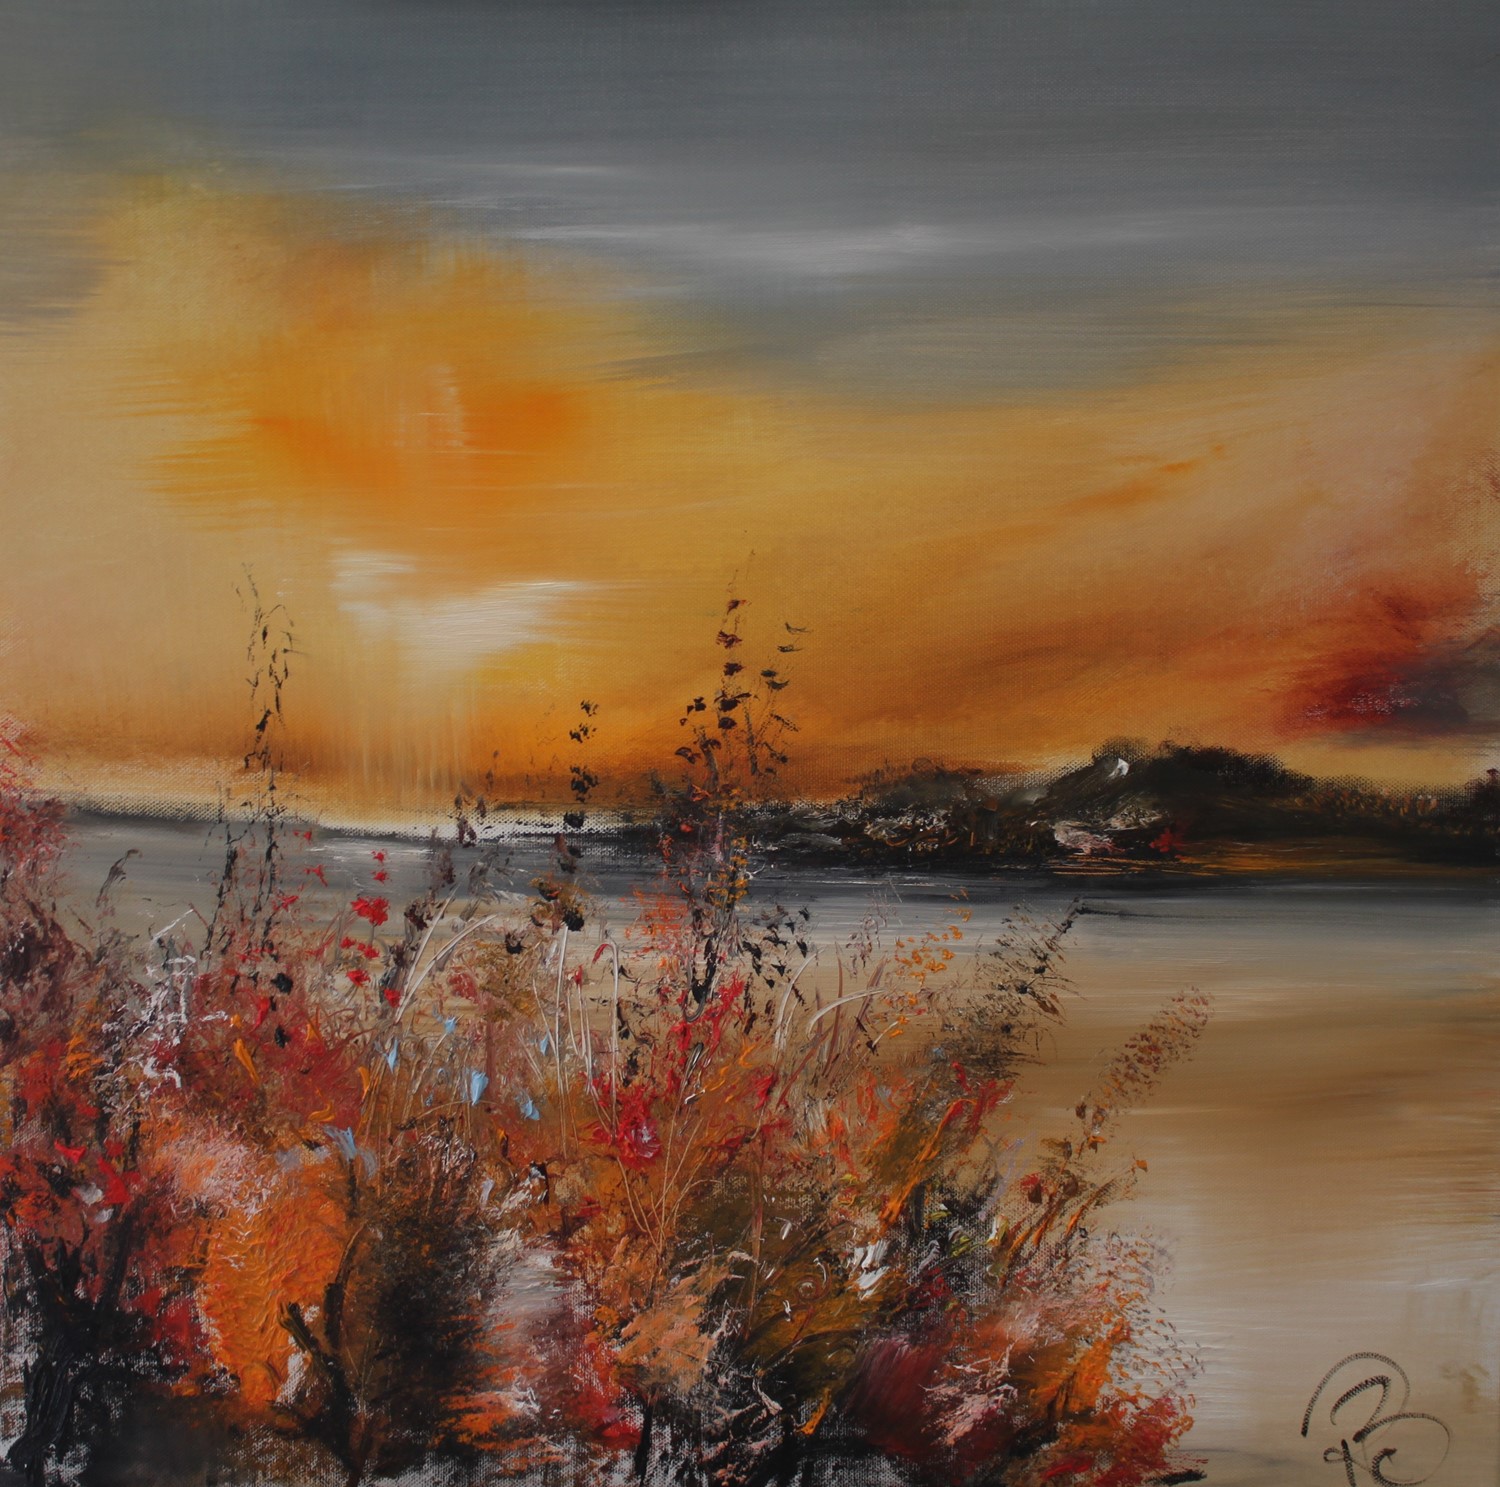 'Autumn is Here' by artist Rosanne Barr